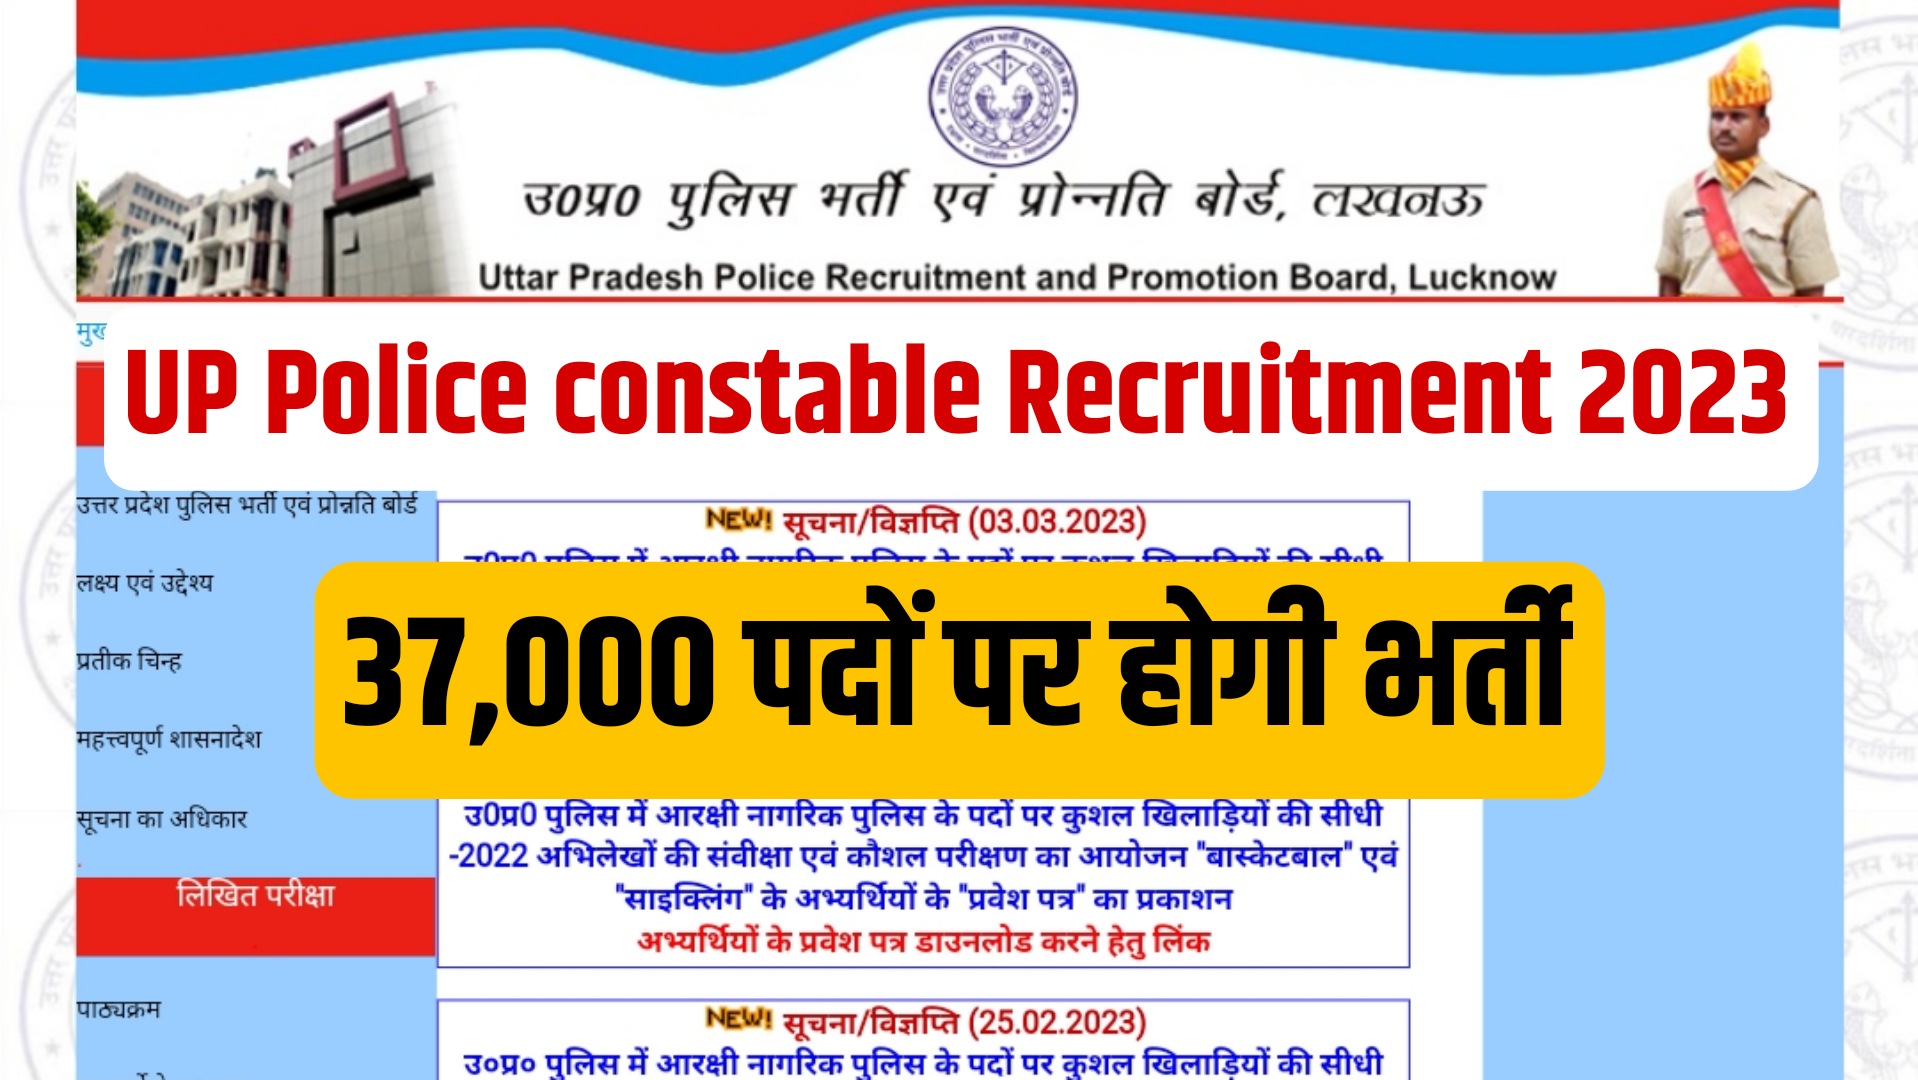 UP Police constable Recruitment 2023 New Update